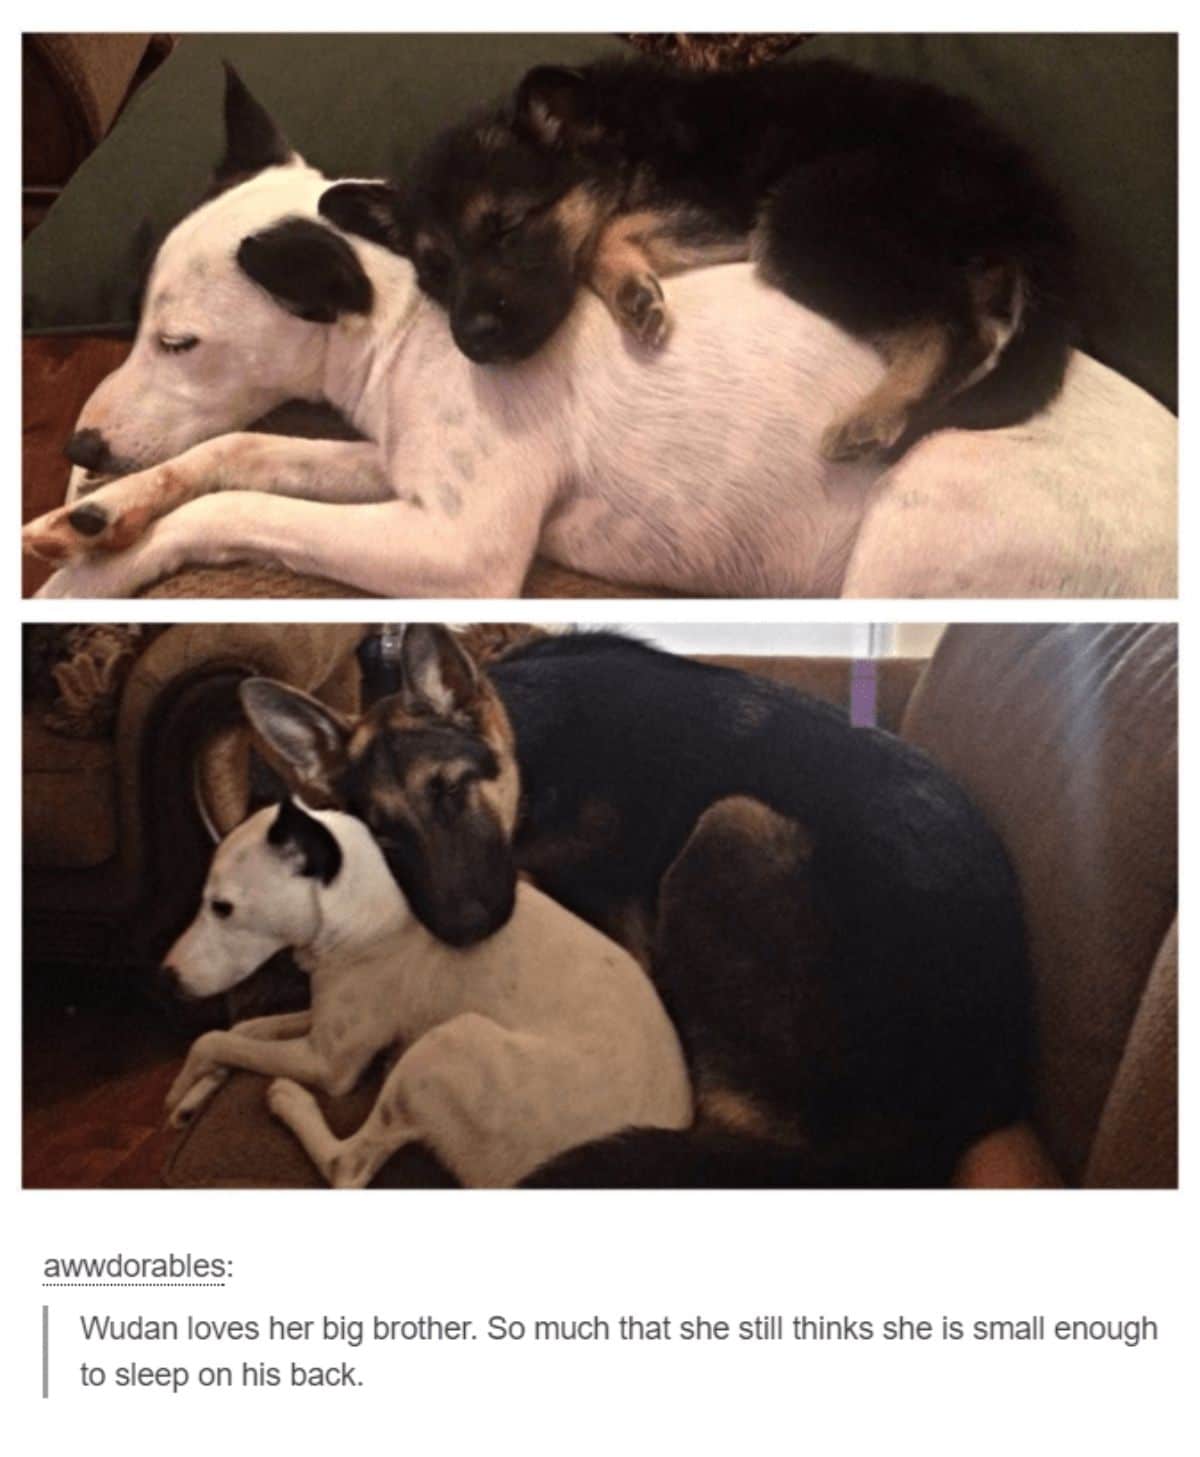 1 photo of a german shepherd puppy sleeping on white and black dog on a sofa and 1 photo of adult german shepherd sleeping on the dog